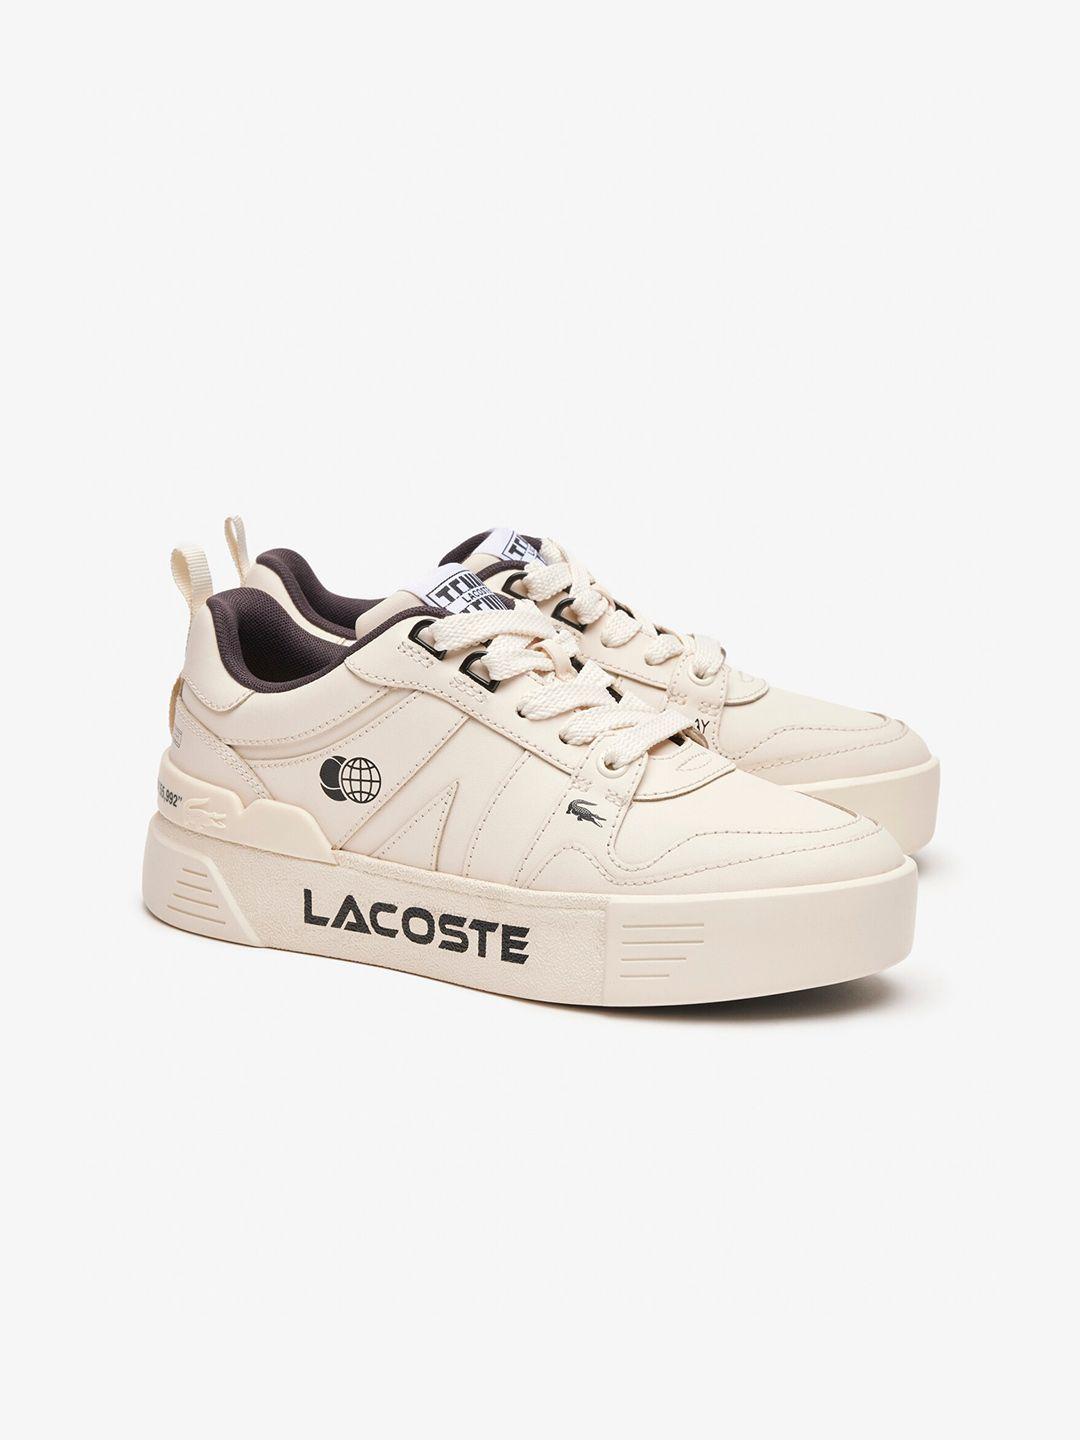 lacoste women leather lace-up sneakers